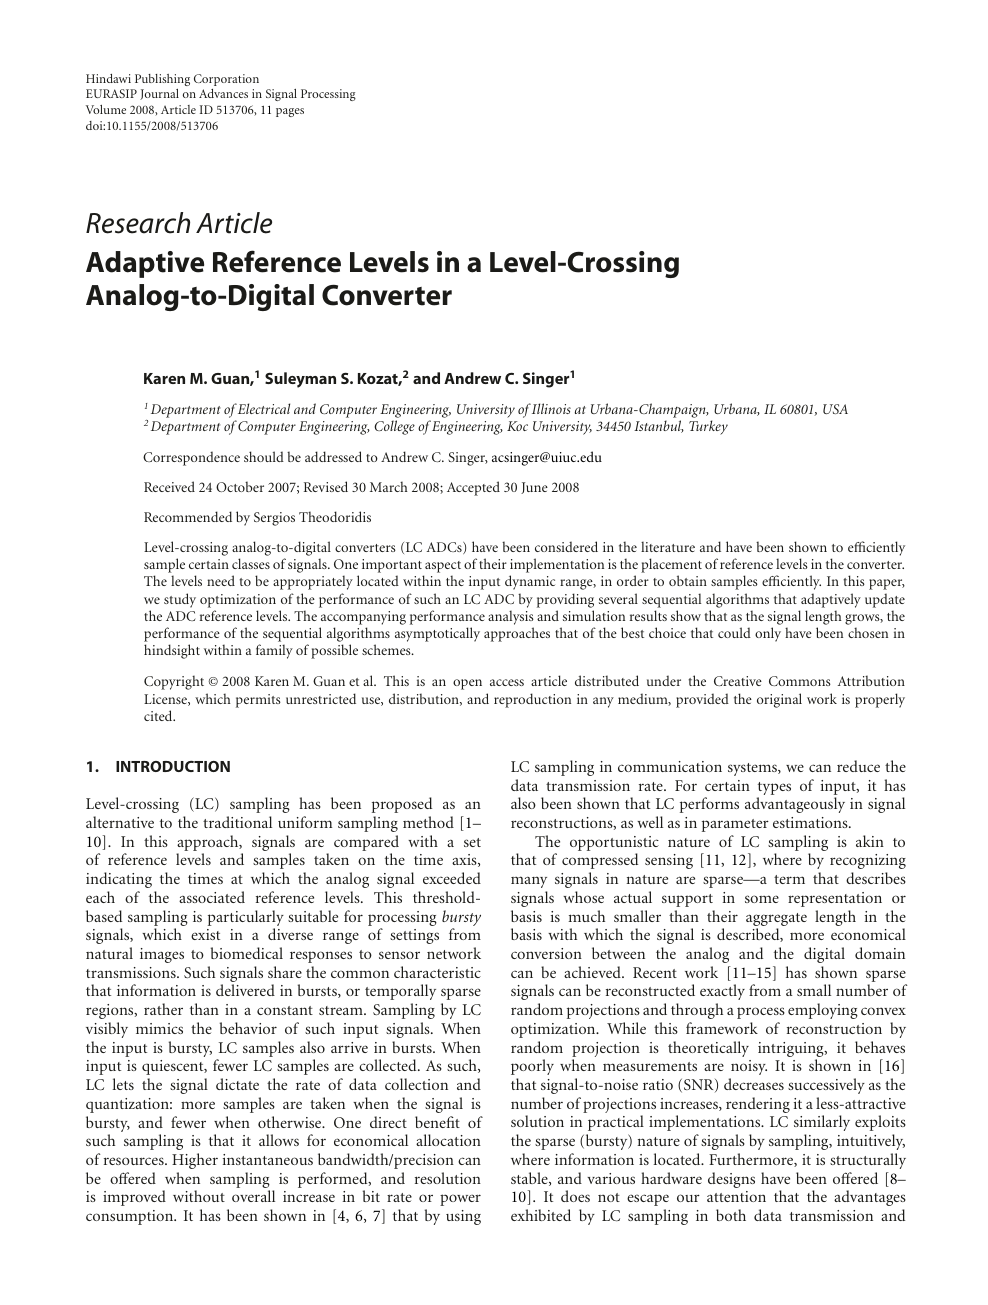 Adaptive Reference Levels In A Level Crossing Analog To Digital Converter Topic Of Research Paper In Computer And Information Sciences Download Scholarly Article Pdf And Read For Free On Cyberleninka Open Science Hub